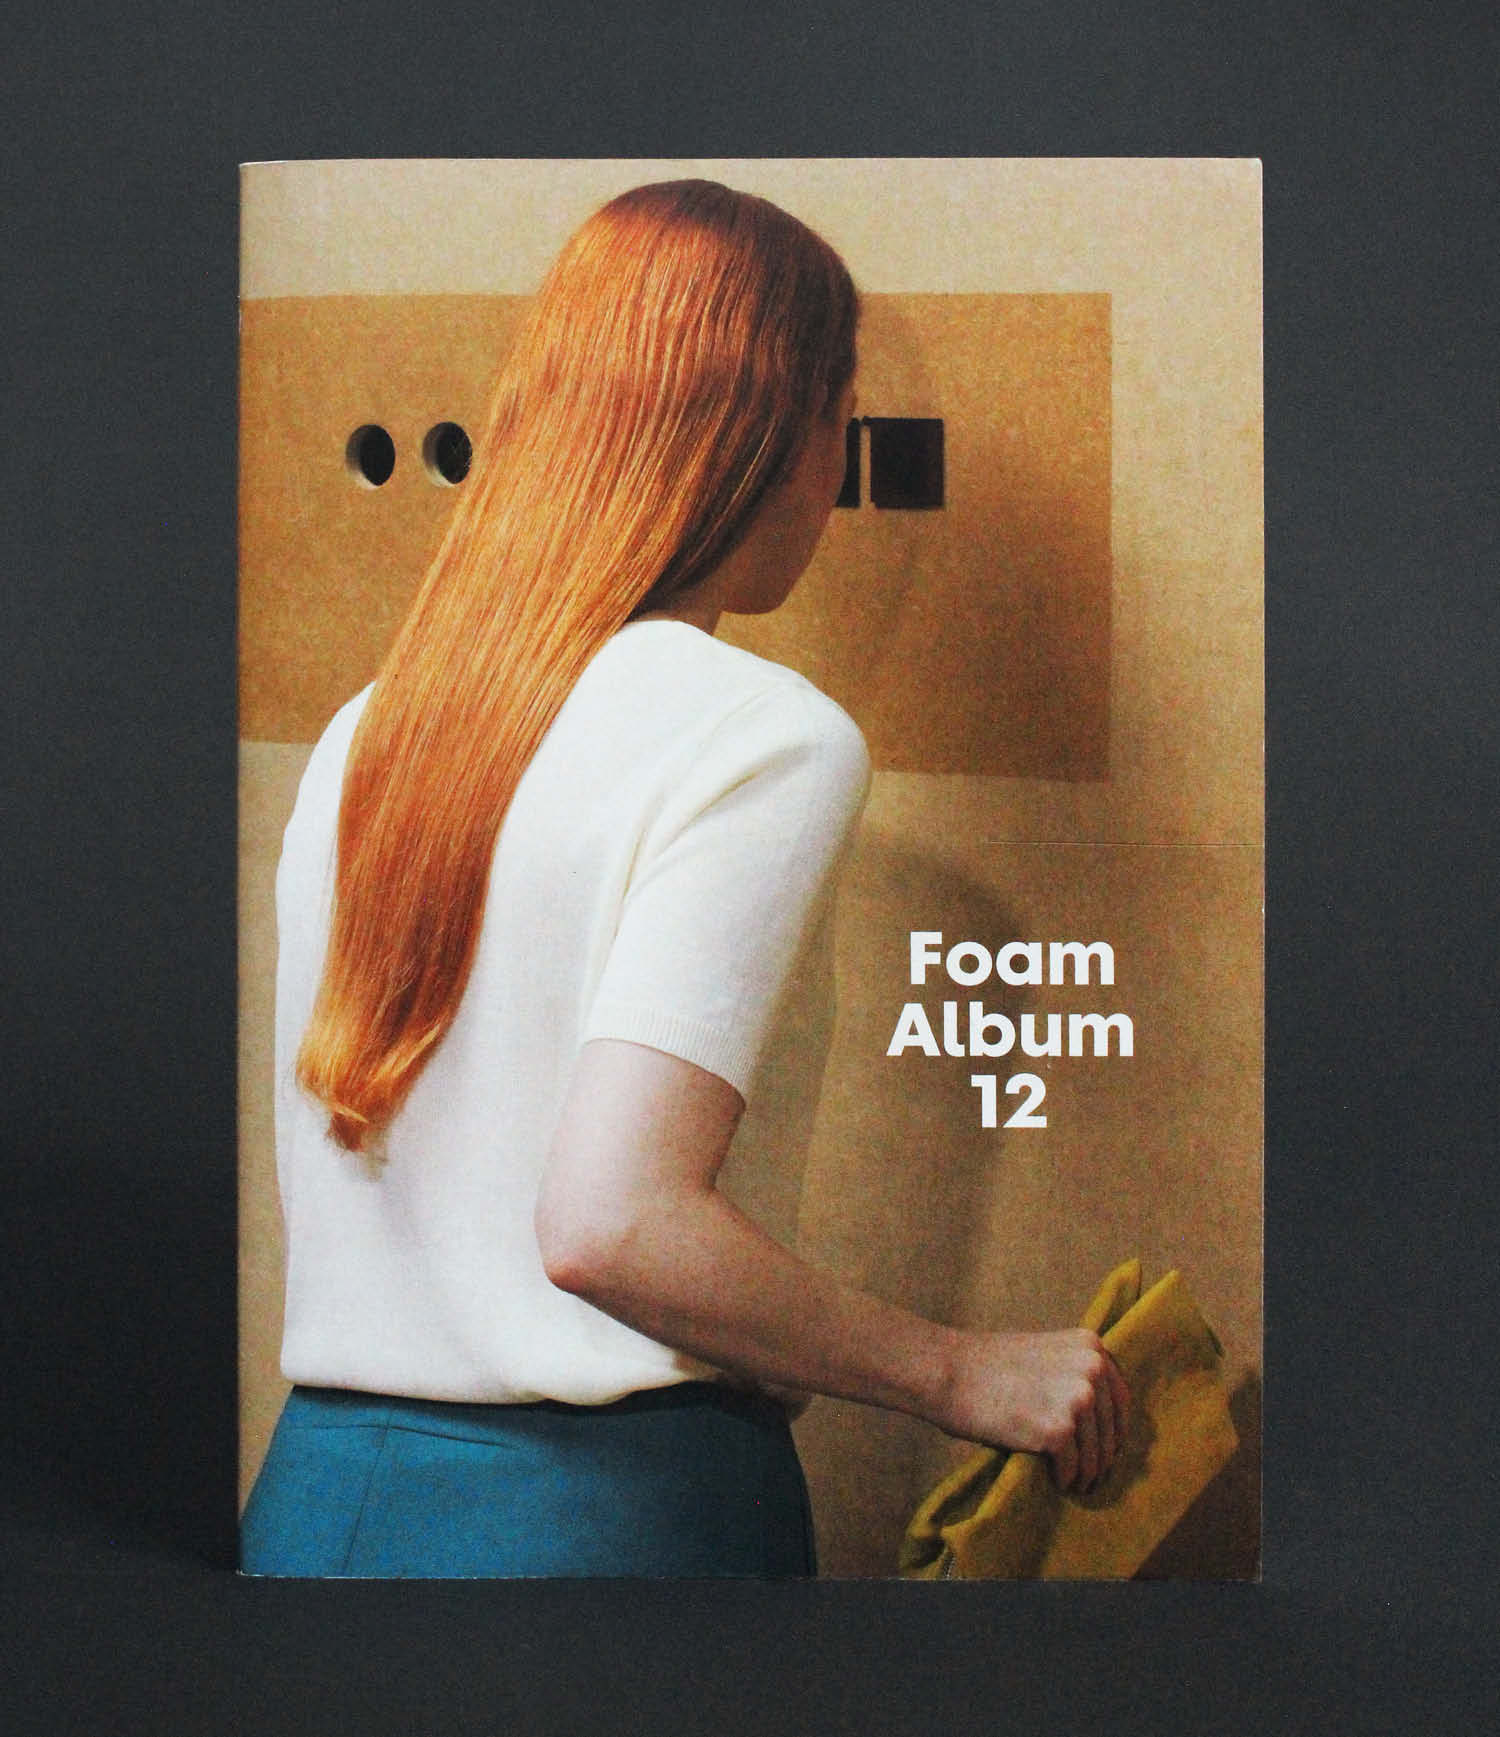 Foam Photography Museum Amsterdam, brochures for Stéphanie Solinas, Rico Scagliola & Michael Meier exhibitions